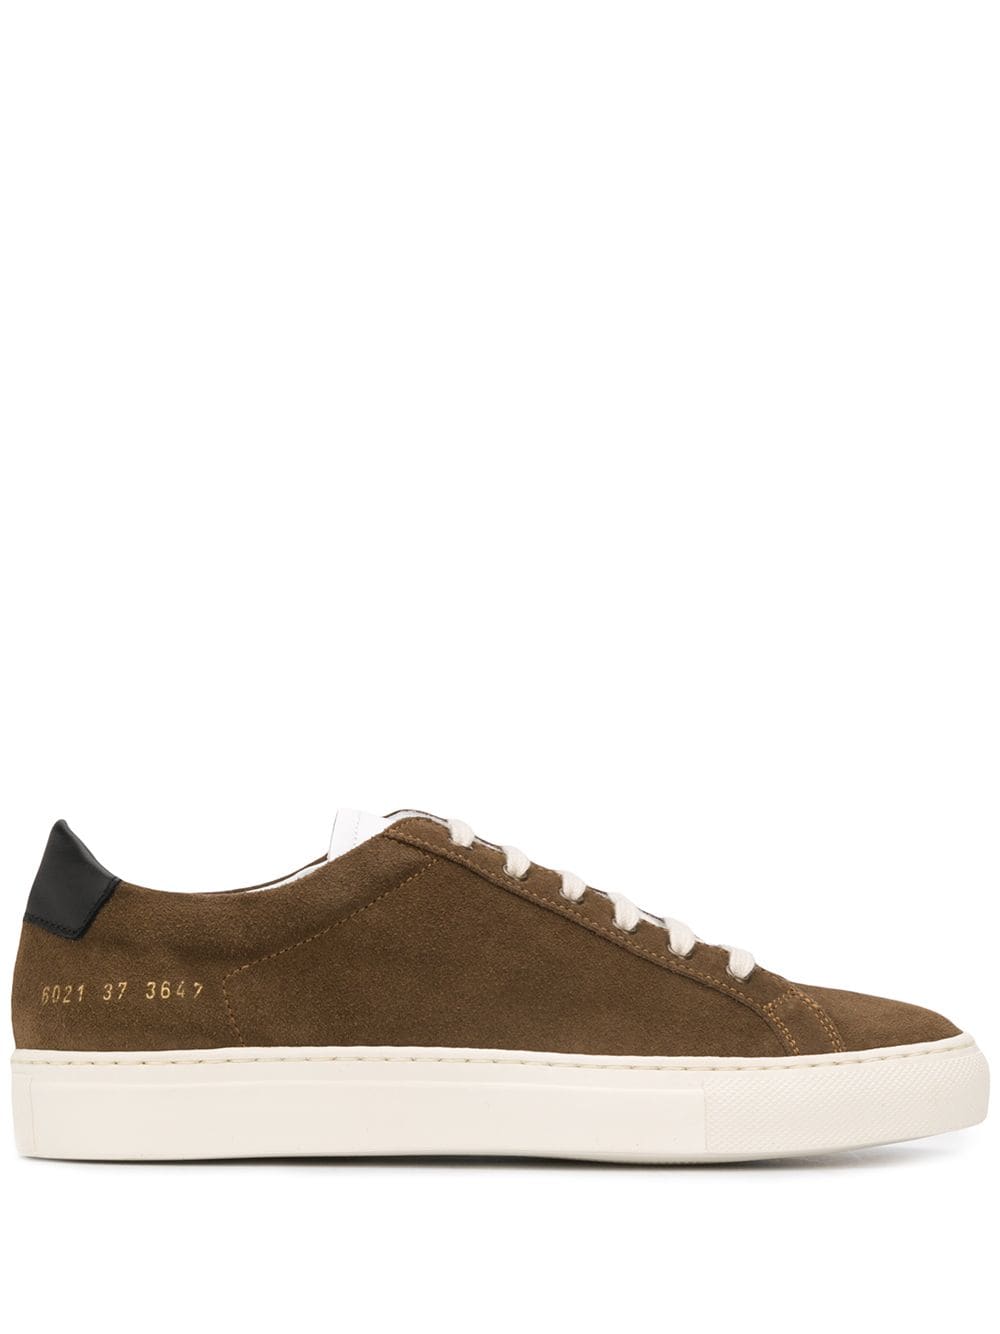 COMMON PROJECTS RETRO LOW TOP SNEAKERS